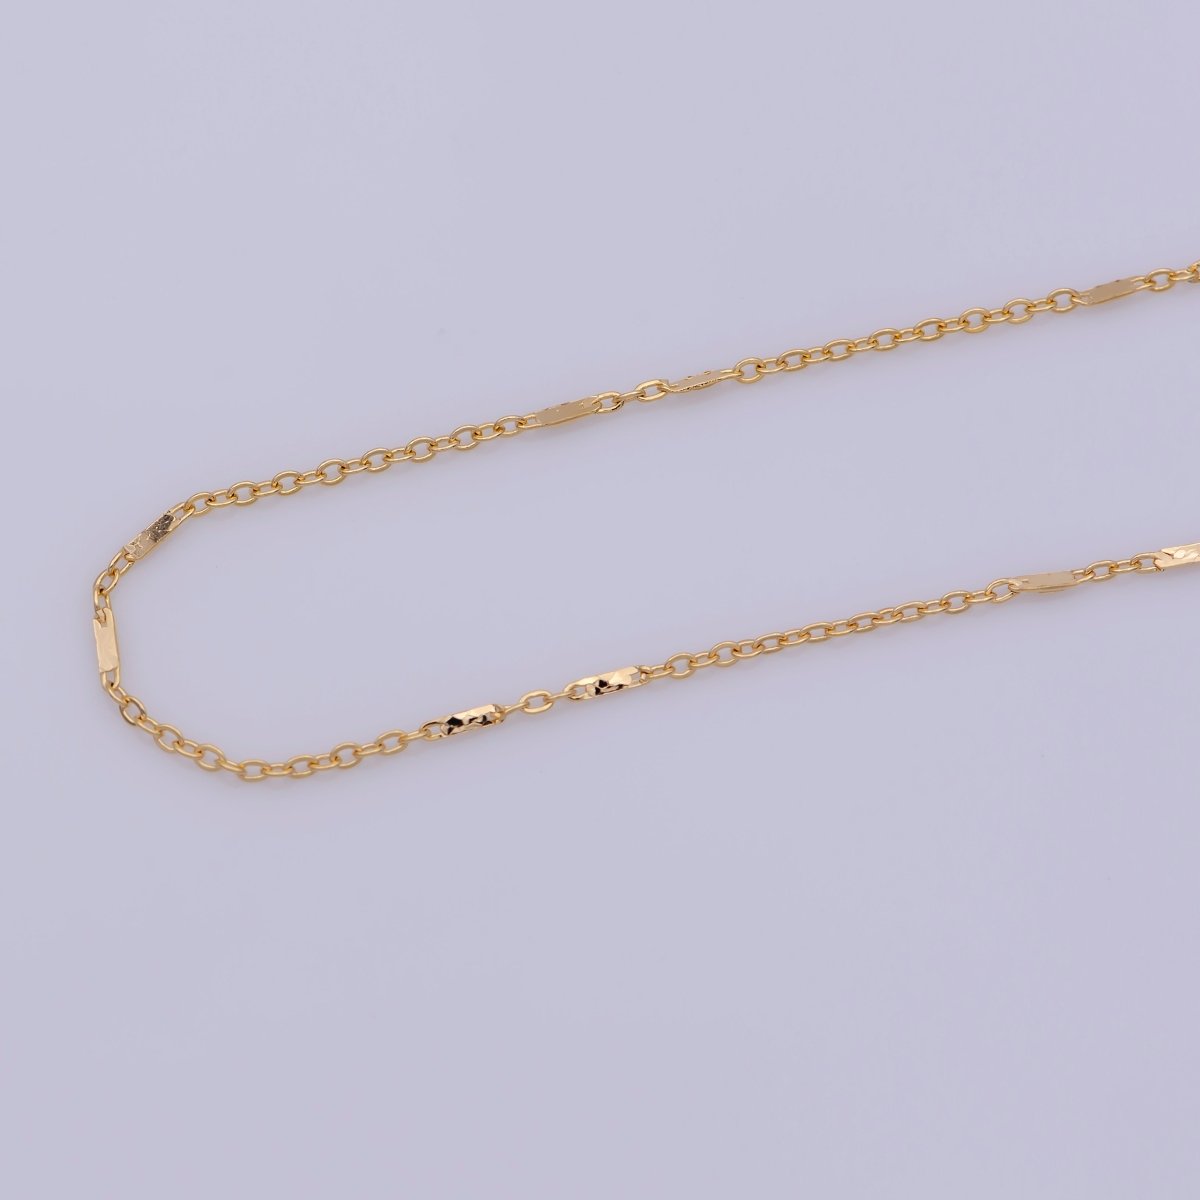 17.5 inch Rolo Chain Necklace, 18K Gold Plated Rolo Finished Chain For Jewelry Making, Dainty 1.2mm Rolo Necklace w/ Spring Ring | CN-323 Clearance Pricing - DLUXCA